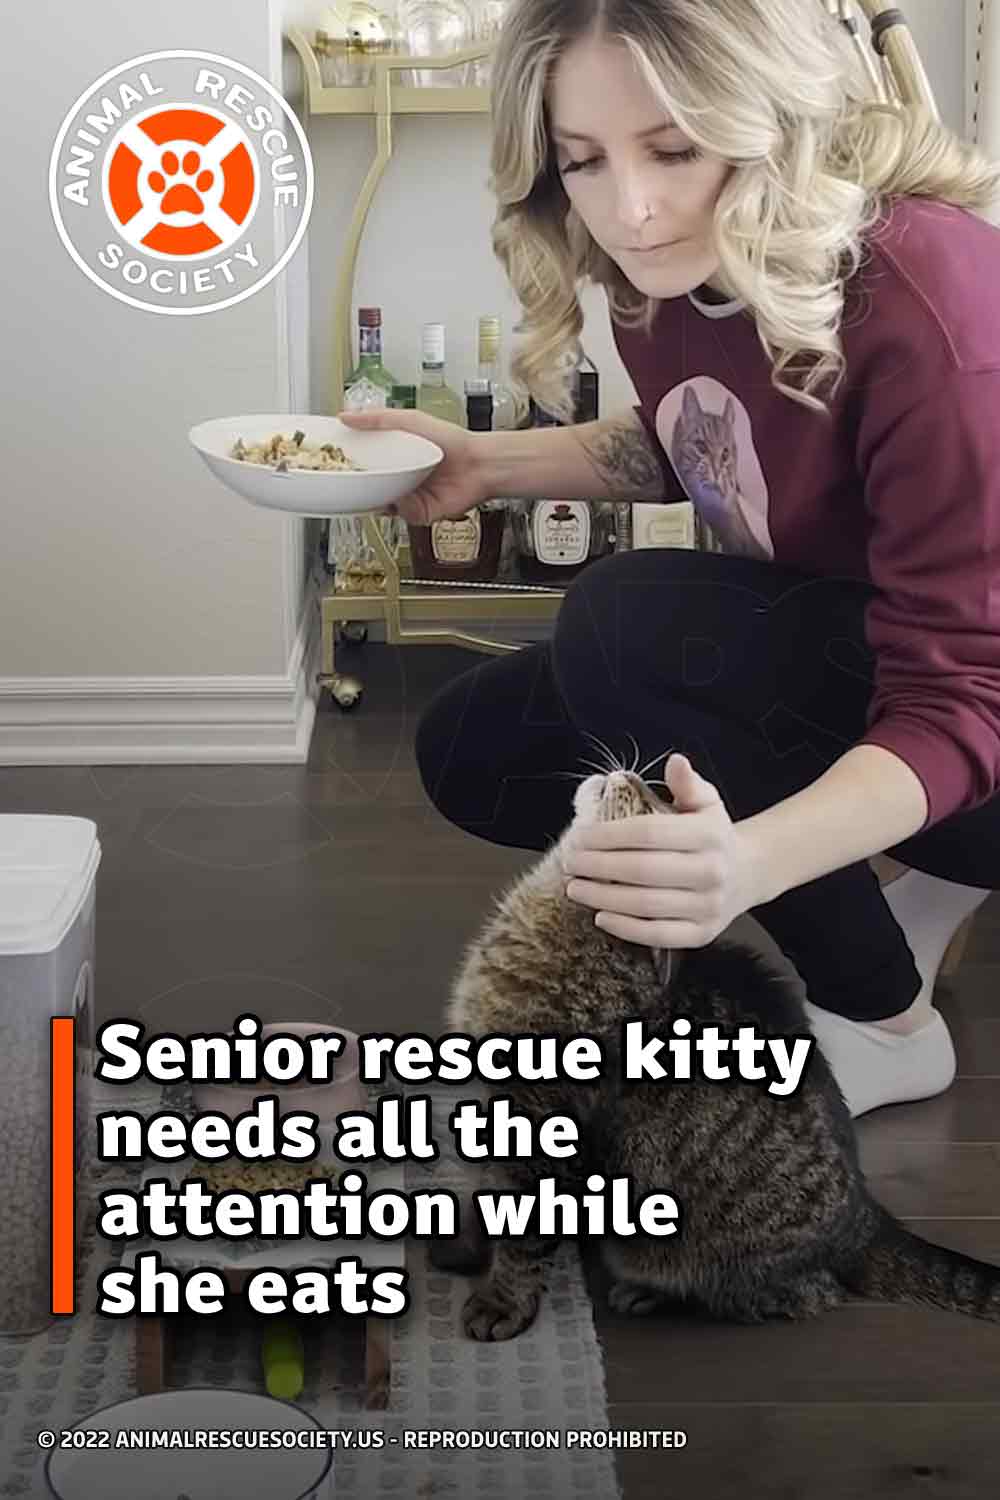 Senior rescue kitty needs all the attention while she eats